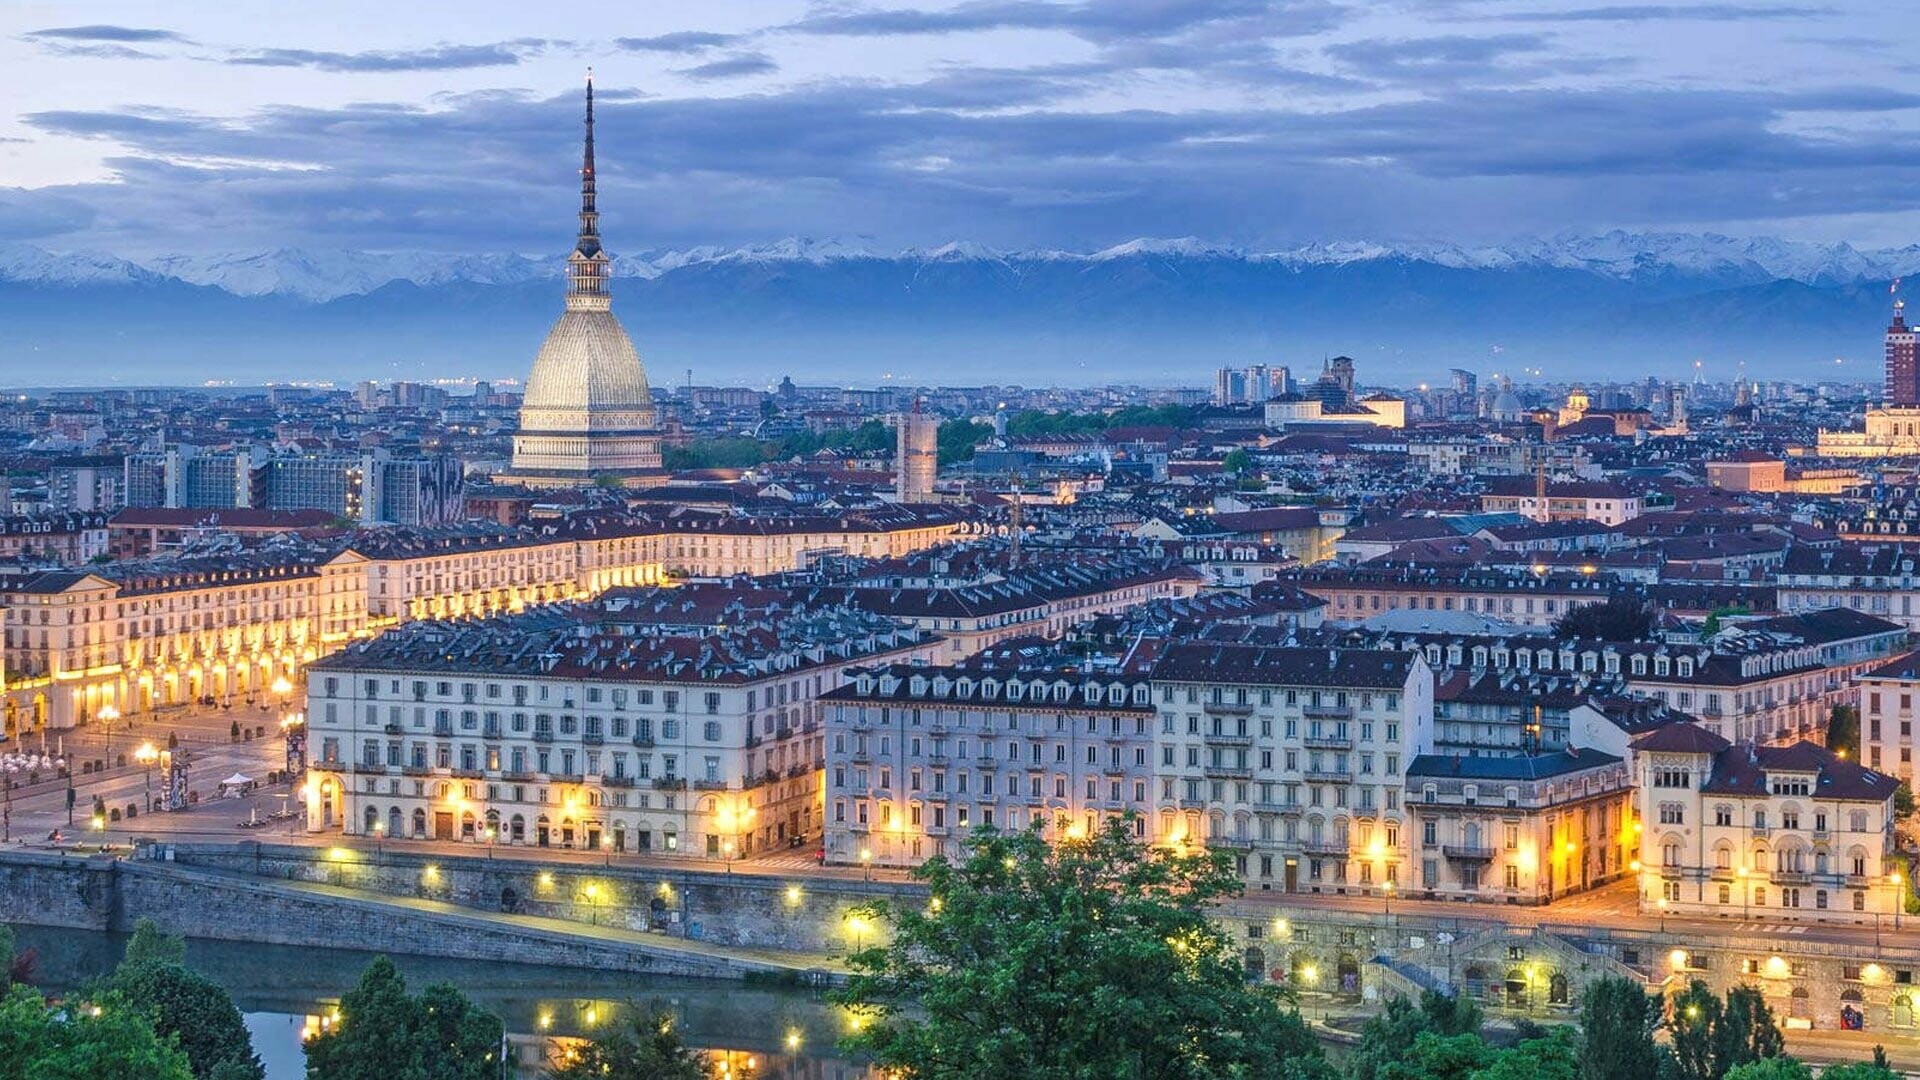 Turin: Well known for its Baroque, Rococo, Neo-classical, and Art Nouveau architecture. 1920x1080 Full HD Wallpaper.